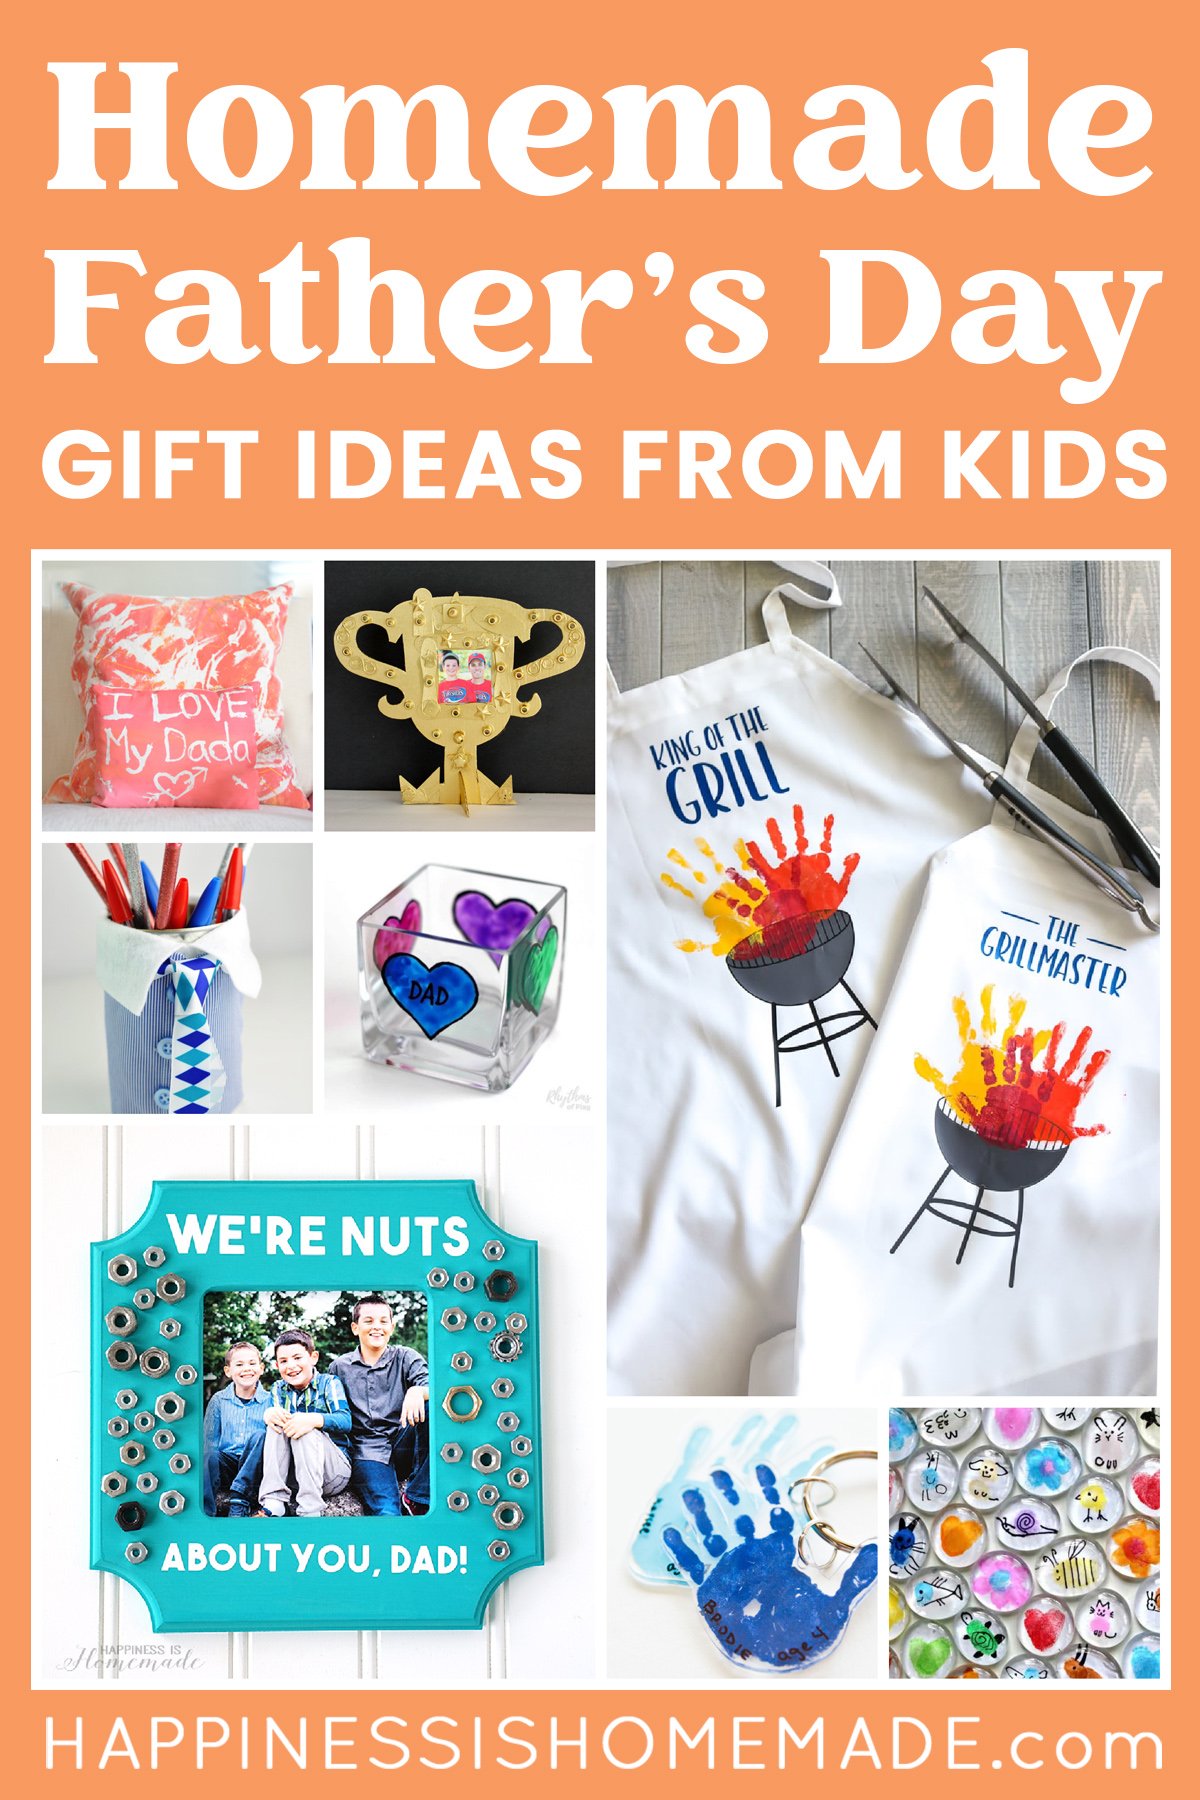 "Homemade Father's Day Gift Ideas from Kids" graphic for social media on orange background